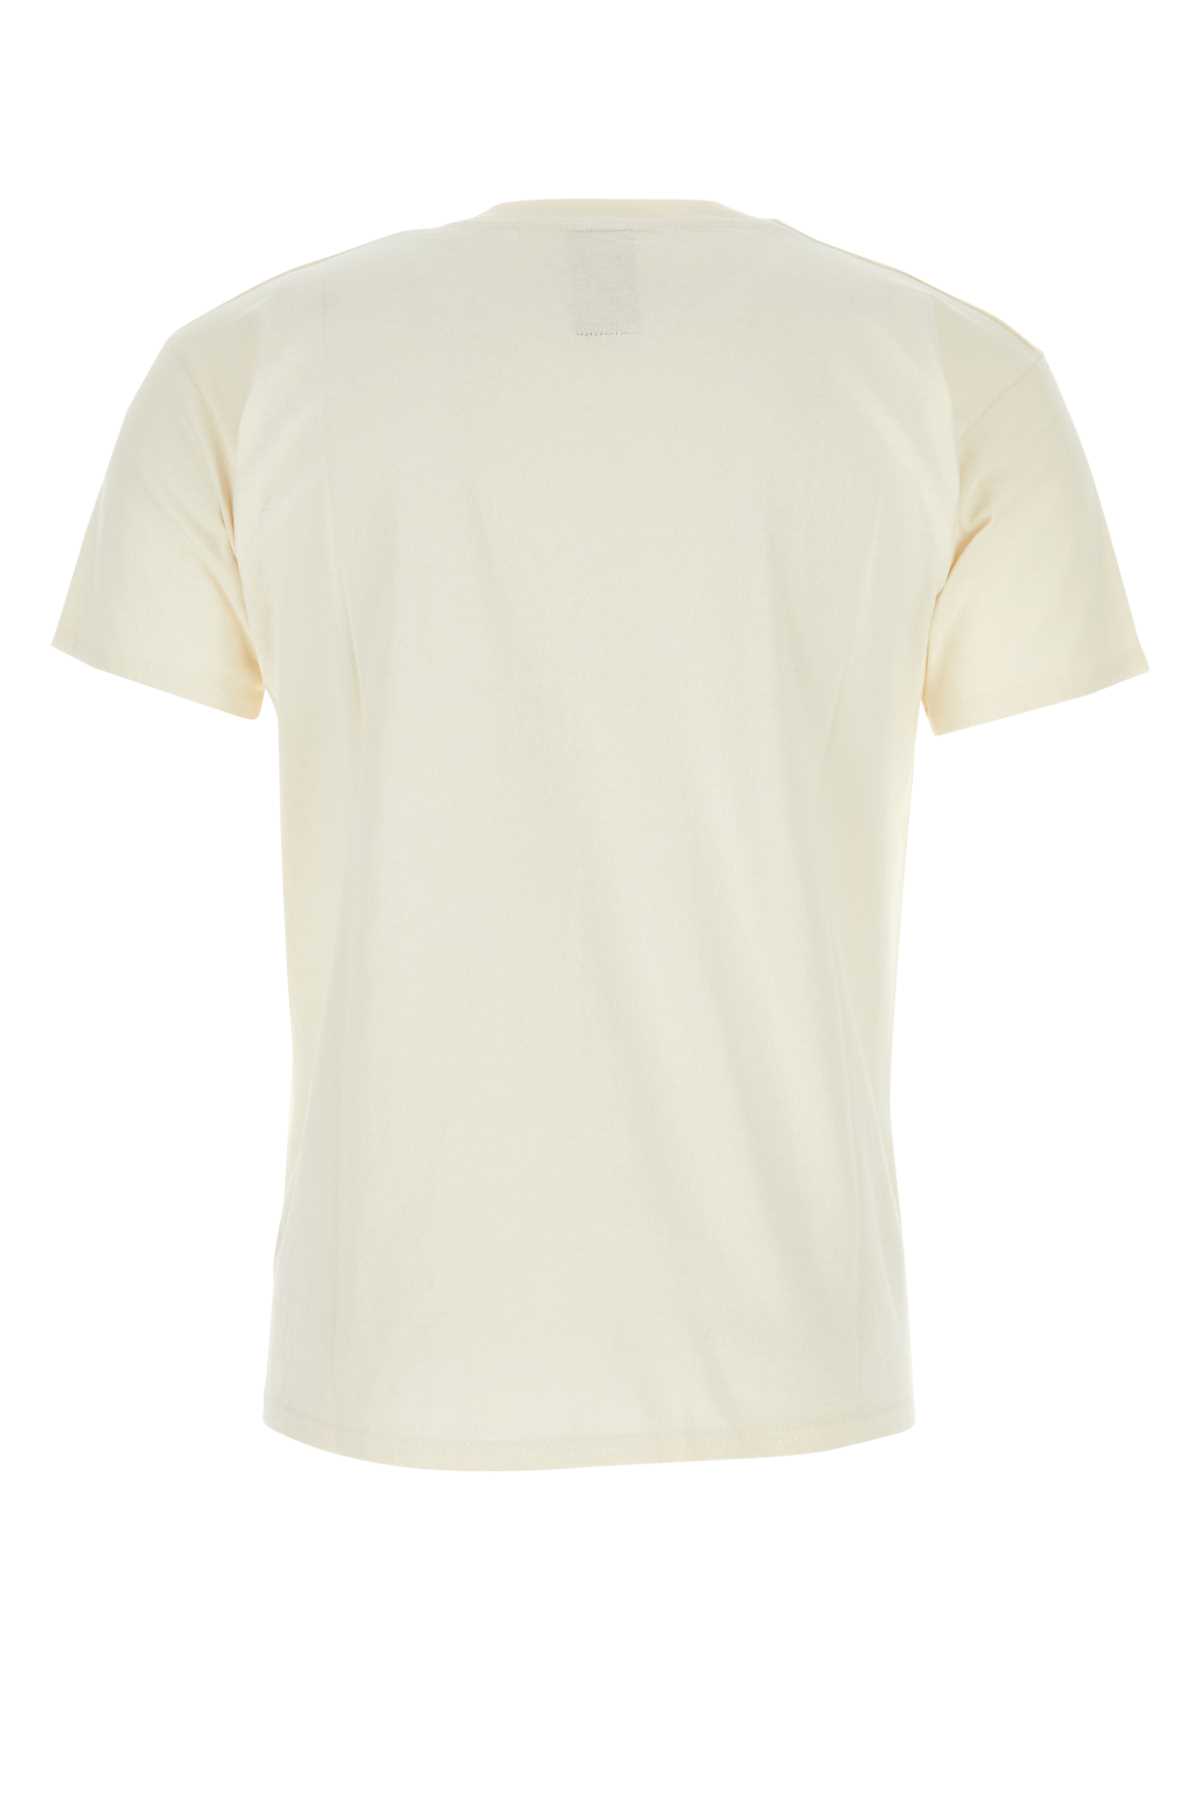 Wild Donkey Ivory Cotton T-shirt In The